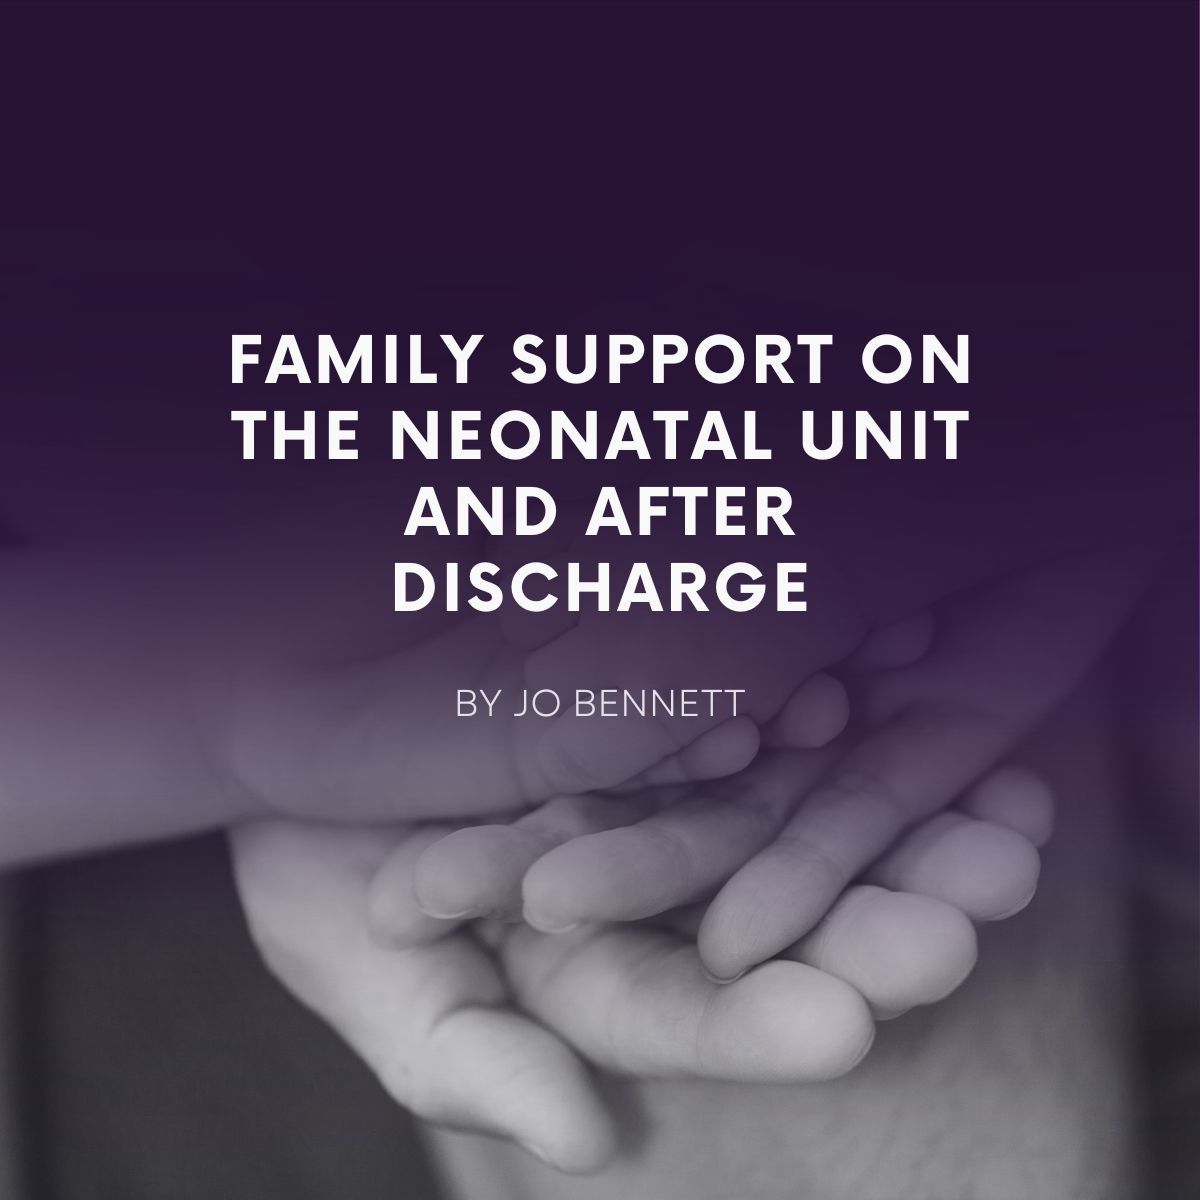 As we prepare to launch our new FICare SIG, we're taking a look at some of the ways we can support families on the neonatal unit. Click here to read our latest blog from Jo Bennett, NNA Neonatal Nurse of the Year 2022, on family support: buff.ly/3UGmIi5